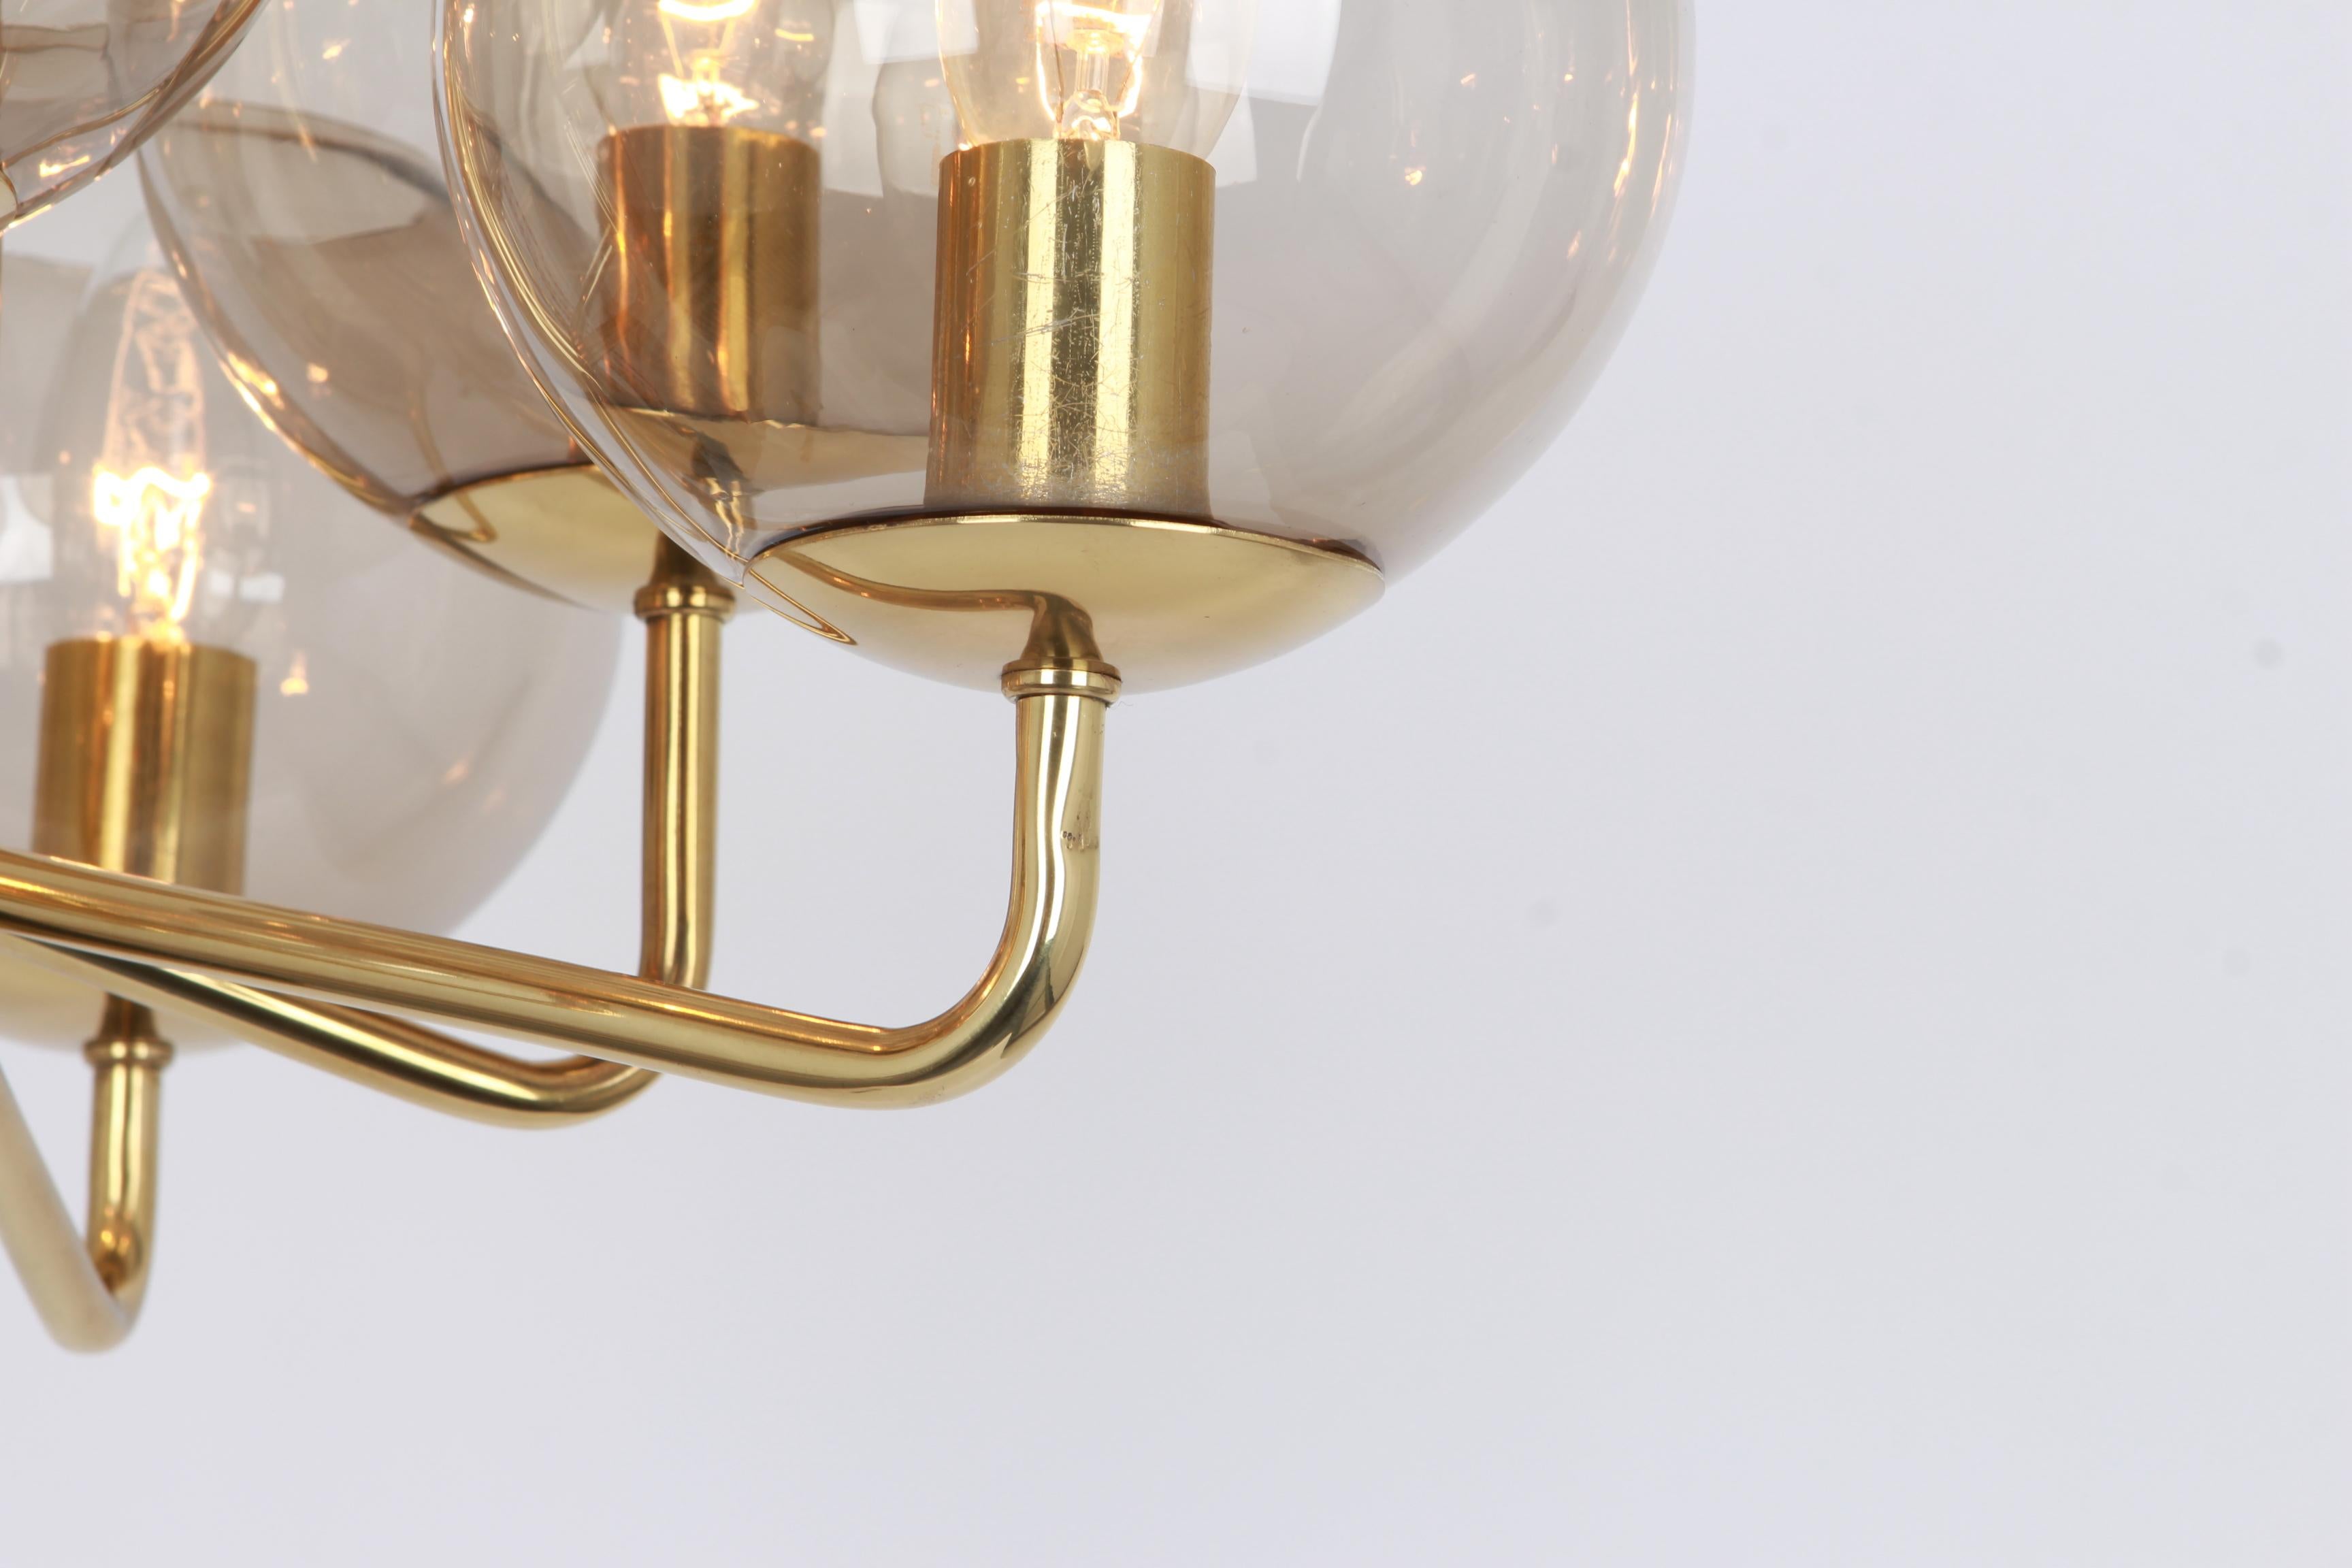 Petite Six-light brass chandelier in the style of Sciolari
Smoked glass in a very beautiful Smokey brown color on a brass frame, best of the 1960s.

High quality and in very good condition. Cleaned, well-wired and ready to use.
The fixture